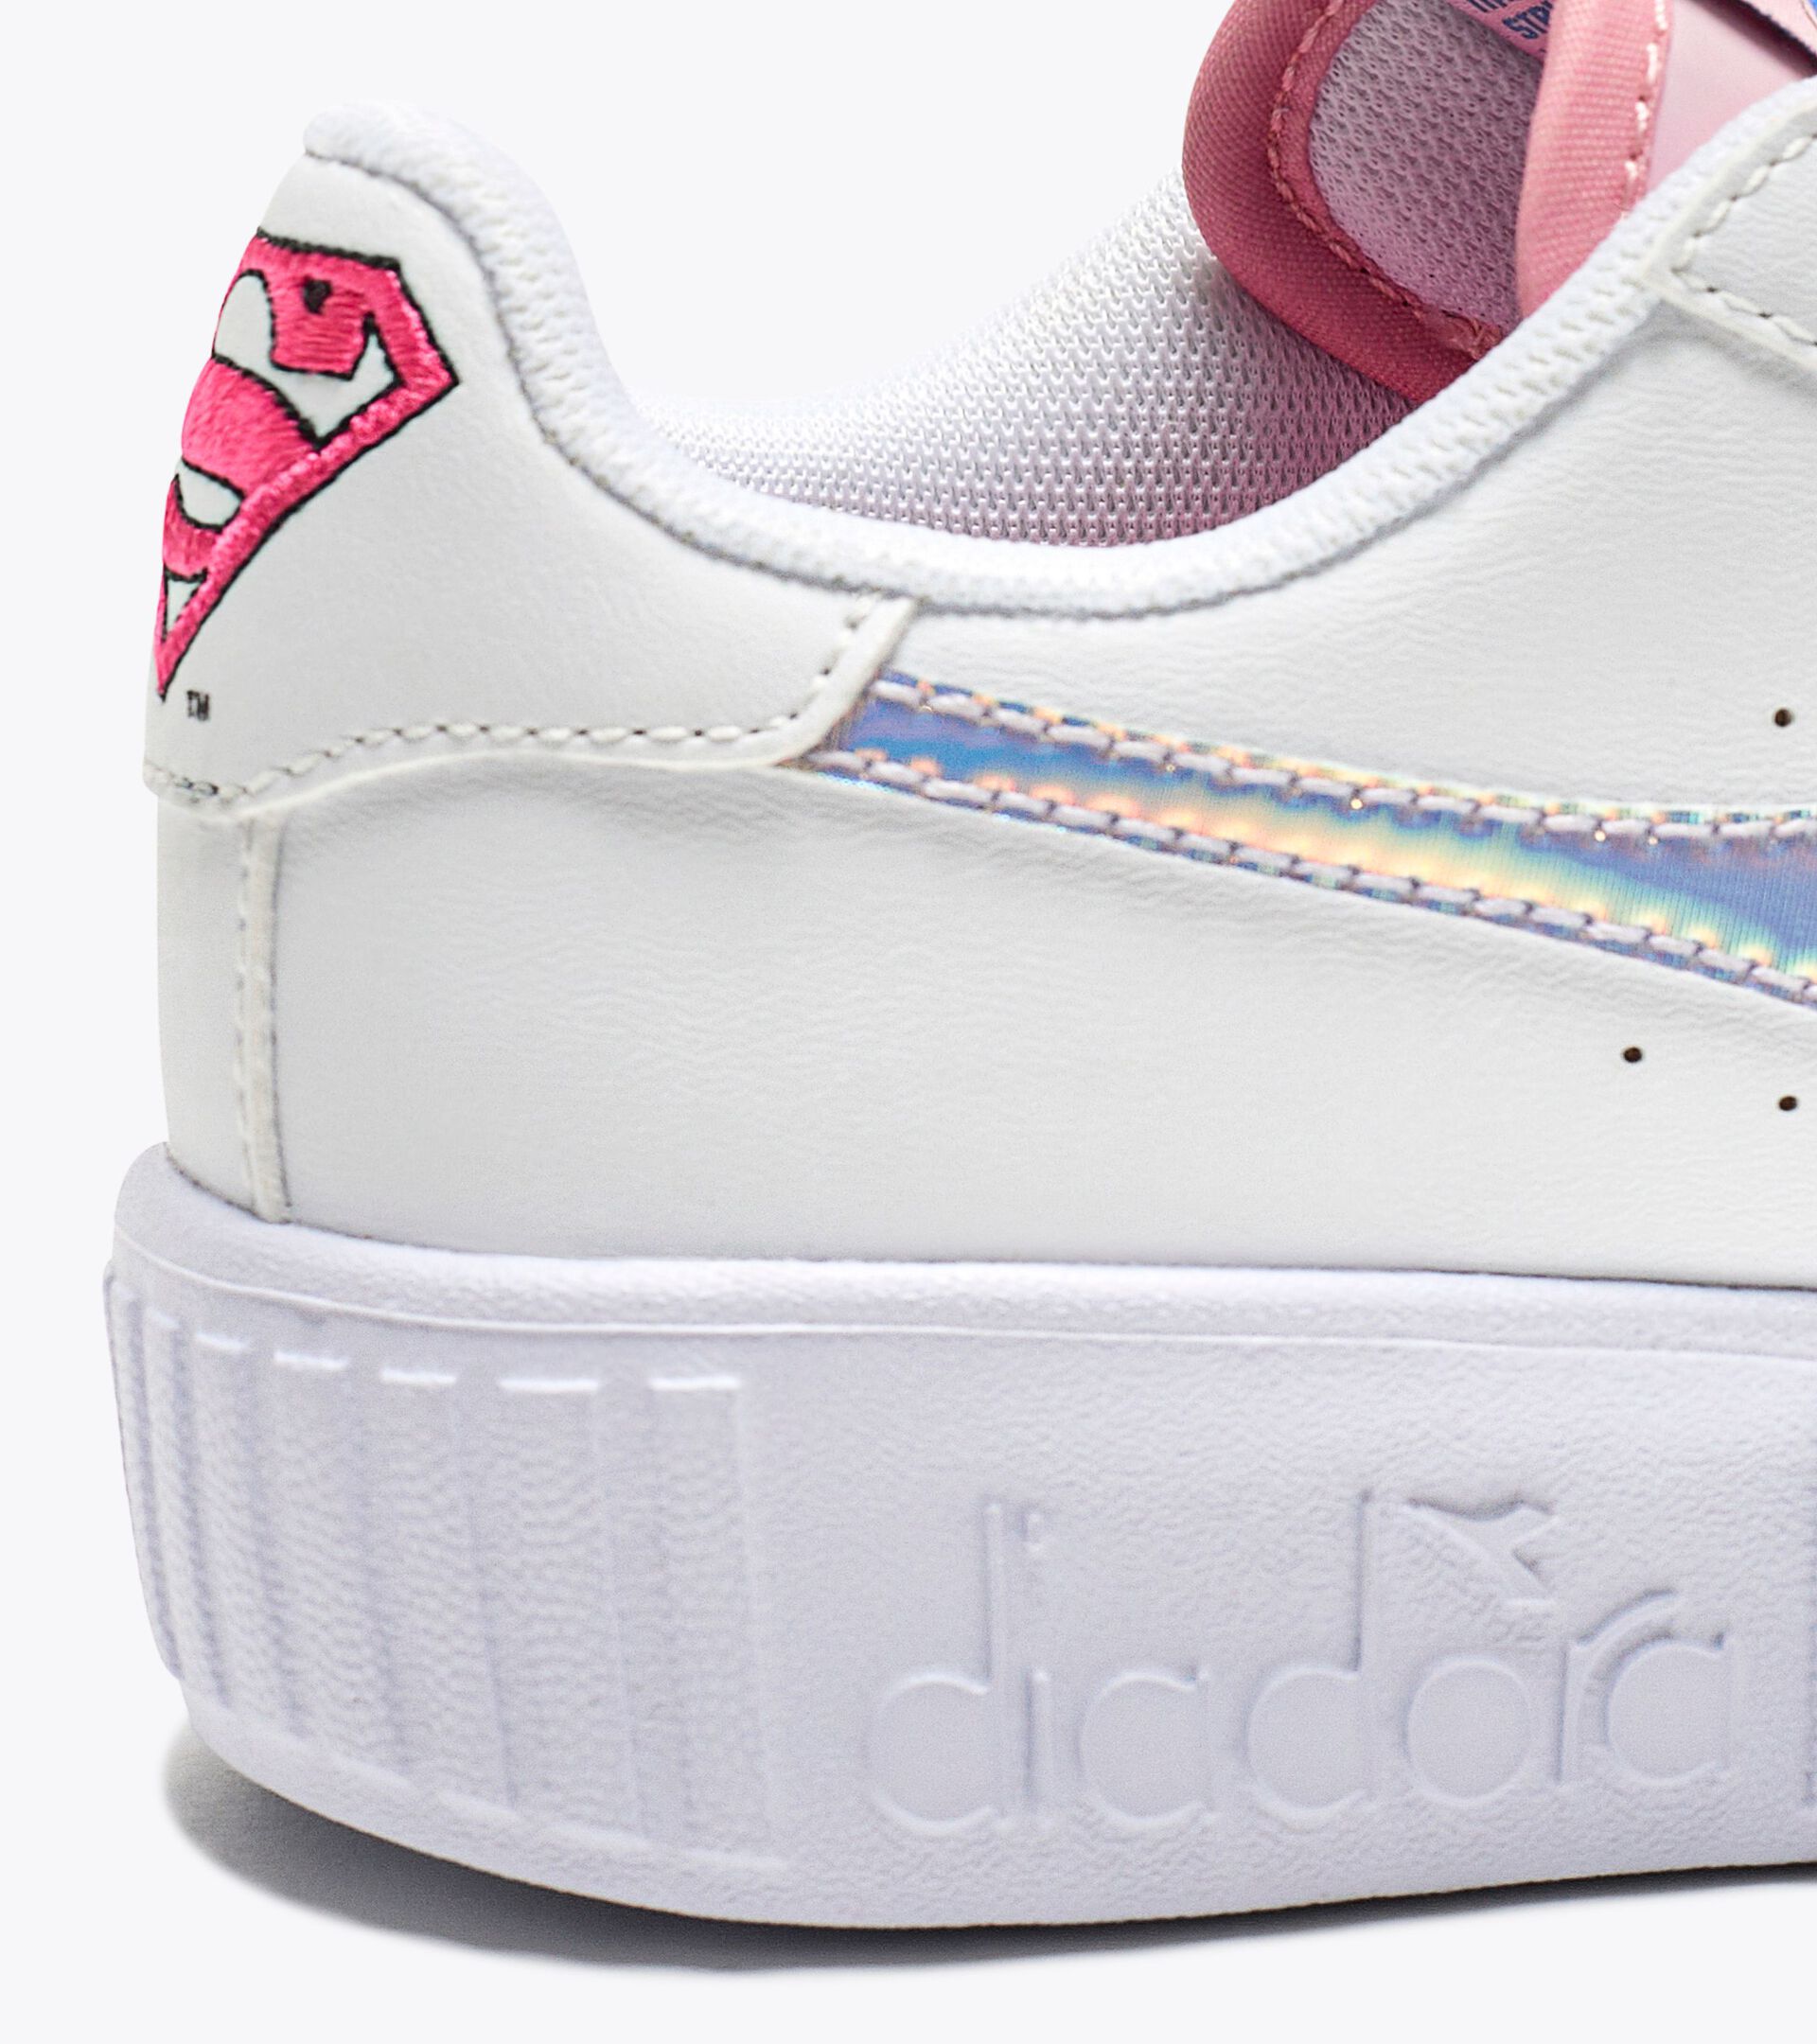 Sneakers de sport - Fille - 4-8 ans  GAME STEP  P PS SUPERGIRL BLANC/GLACE ORCHIDEE - Diadora